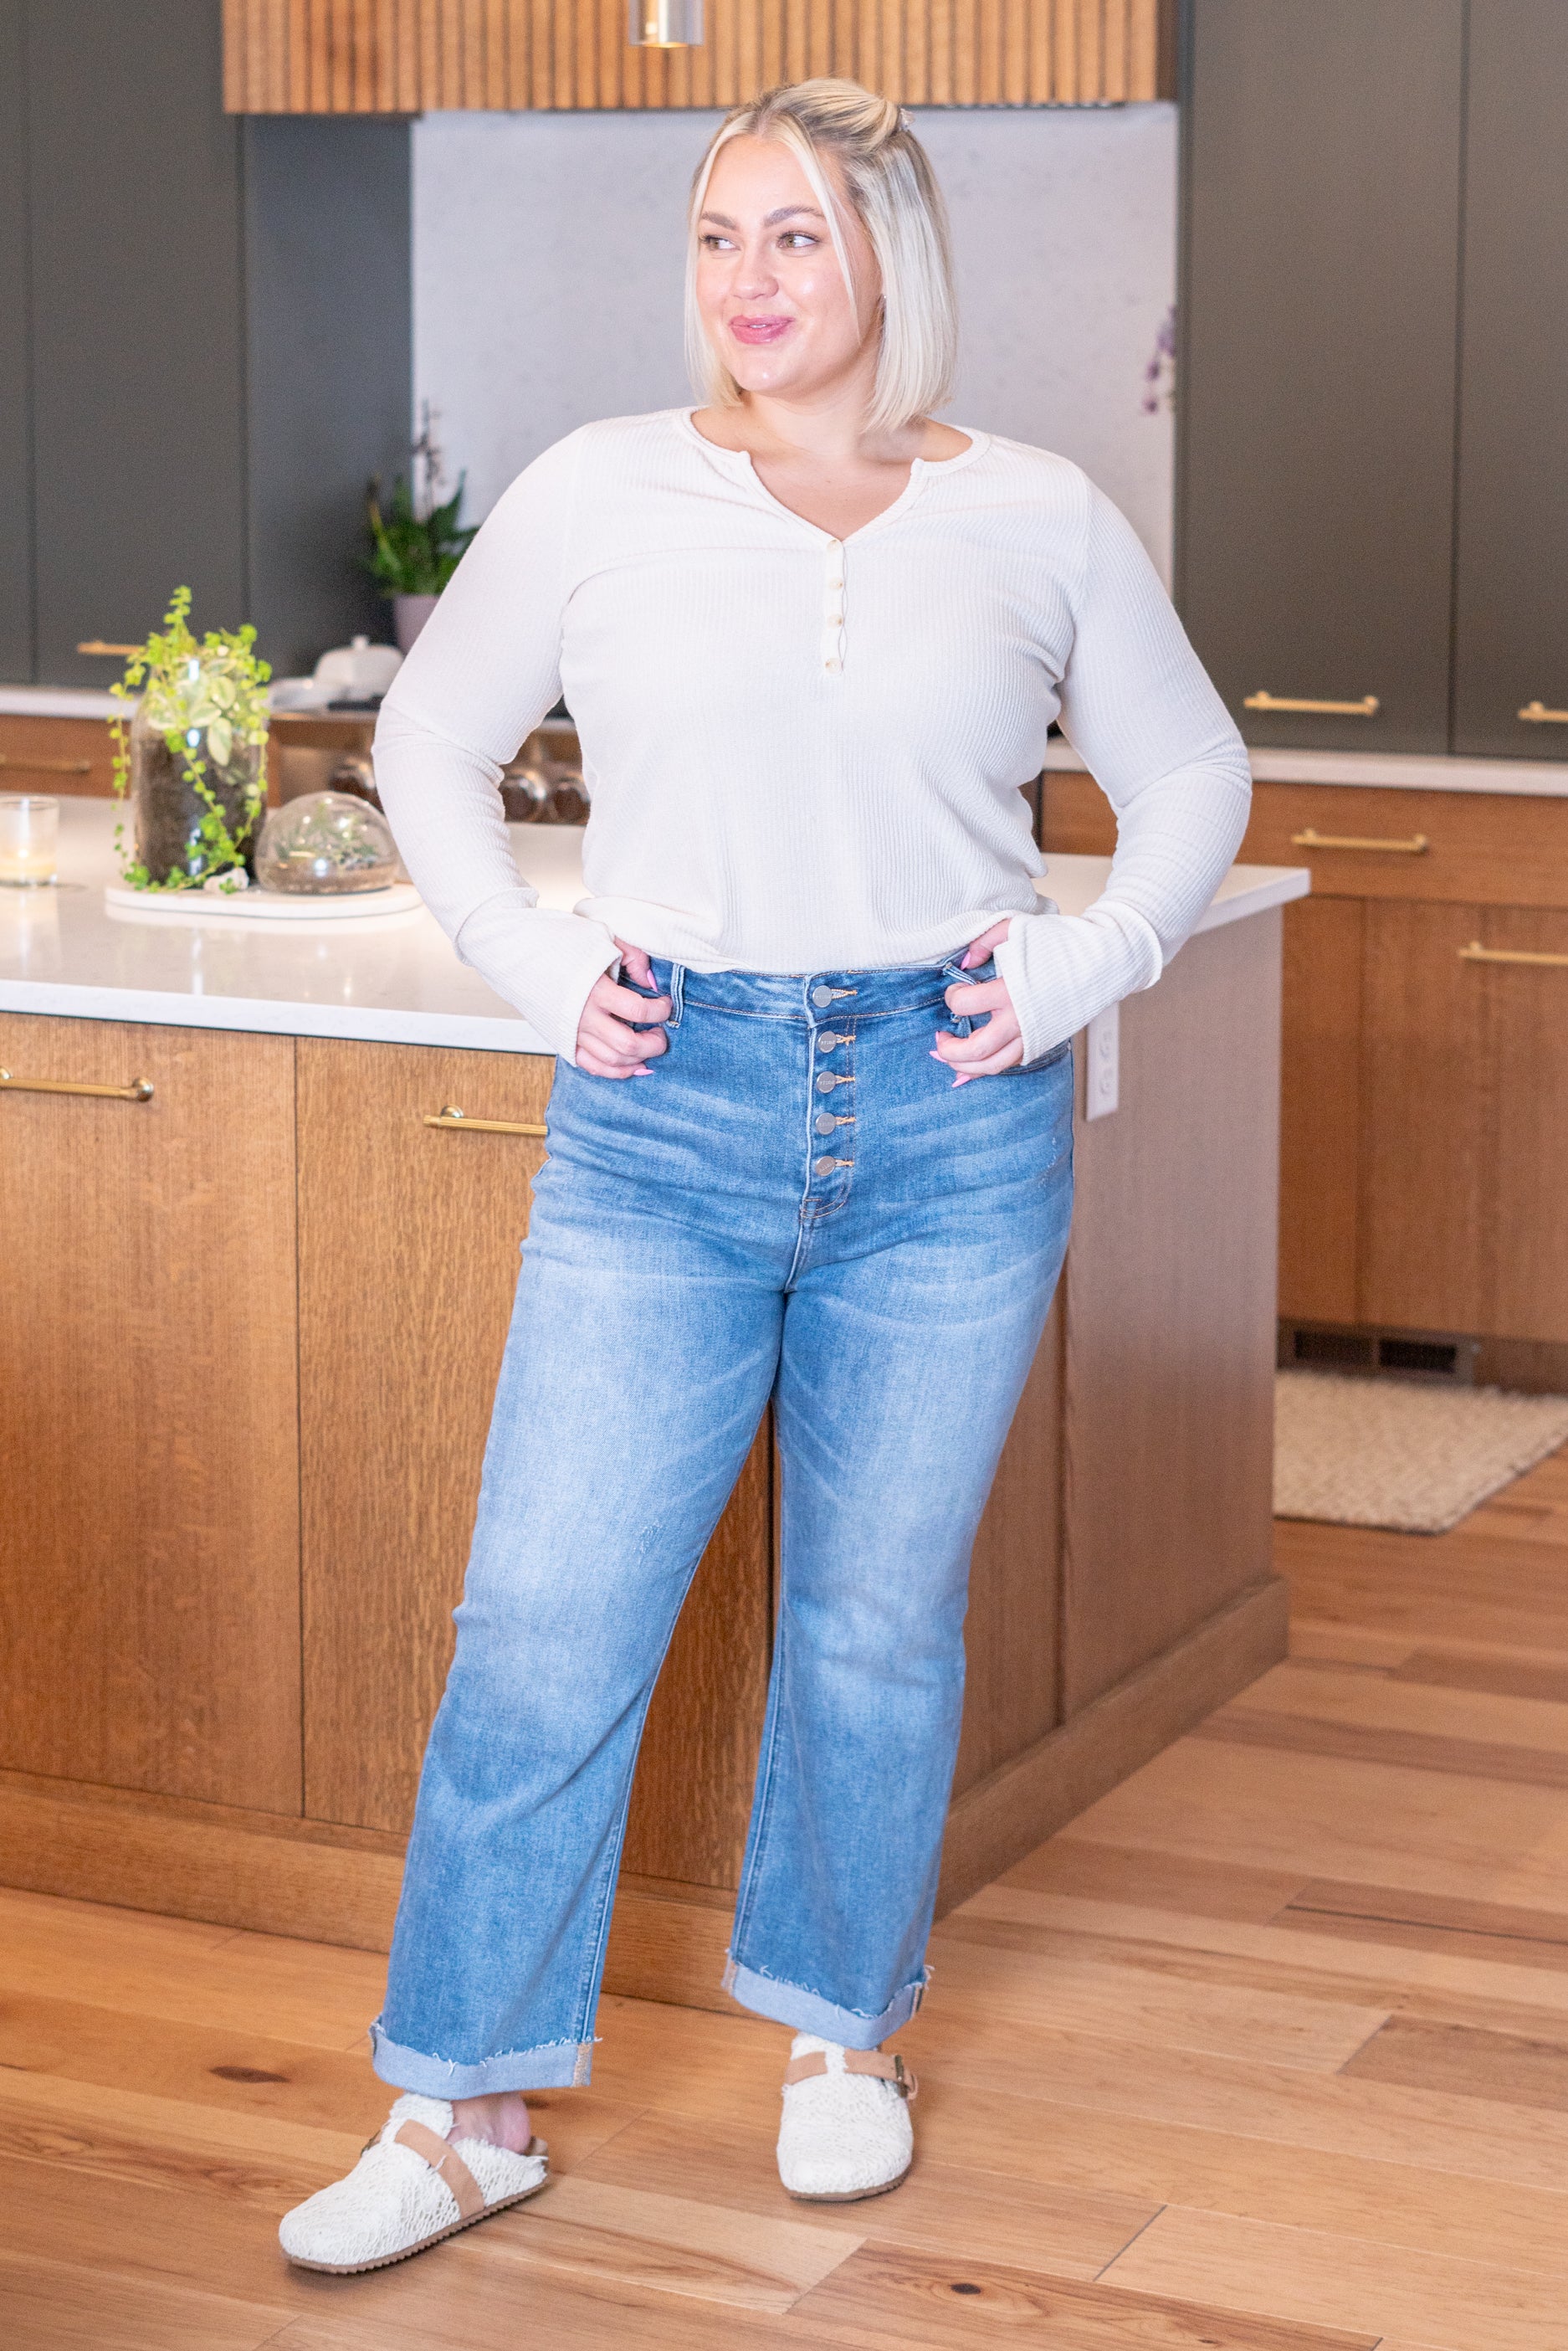 Plus Size High Rise Wide Leg Button Fly Jeans